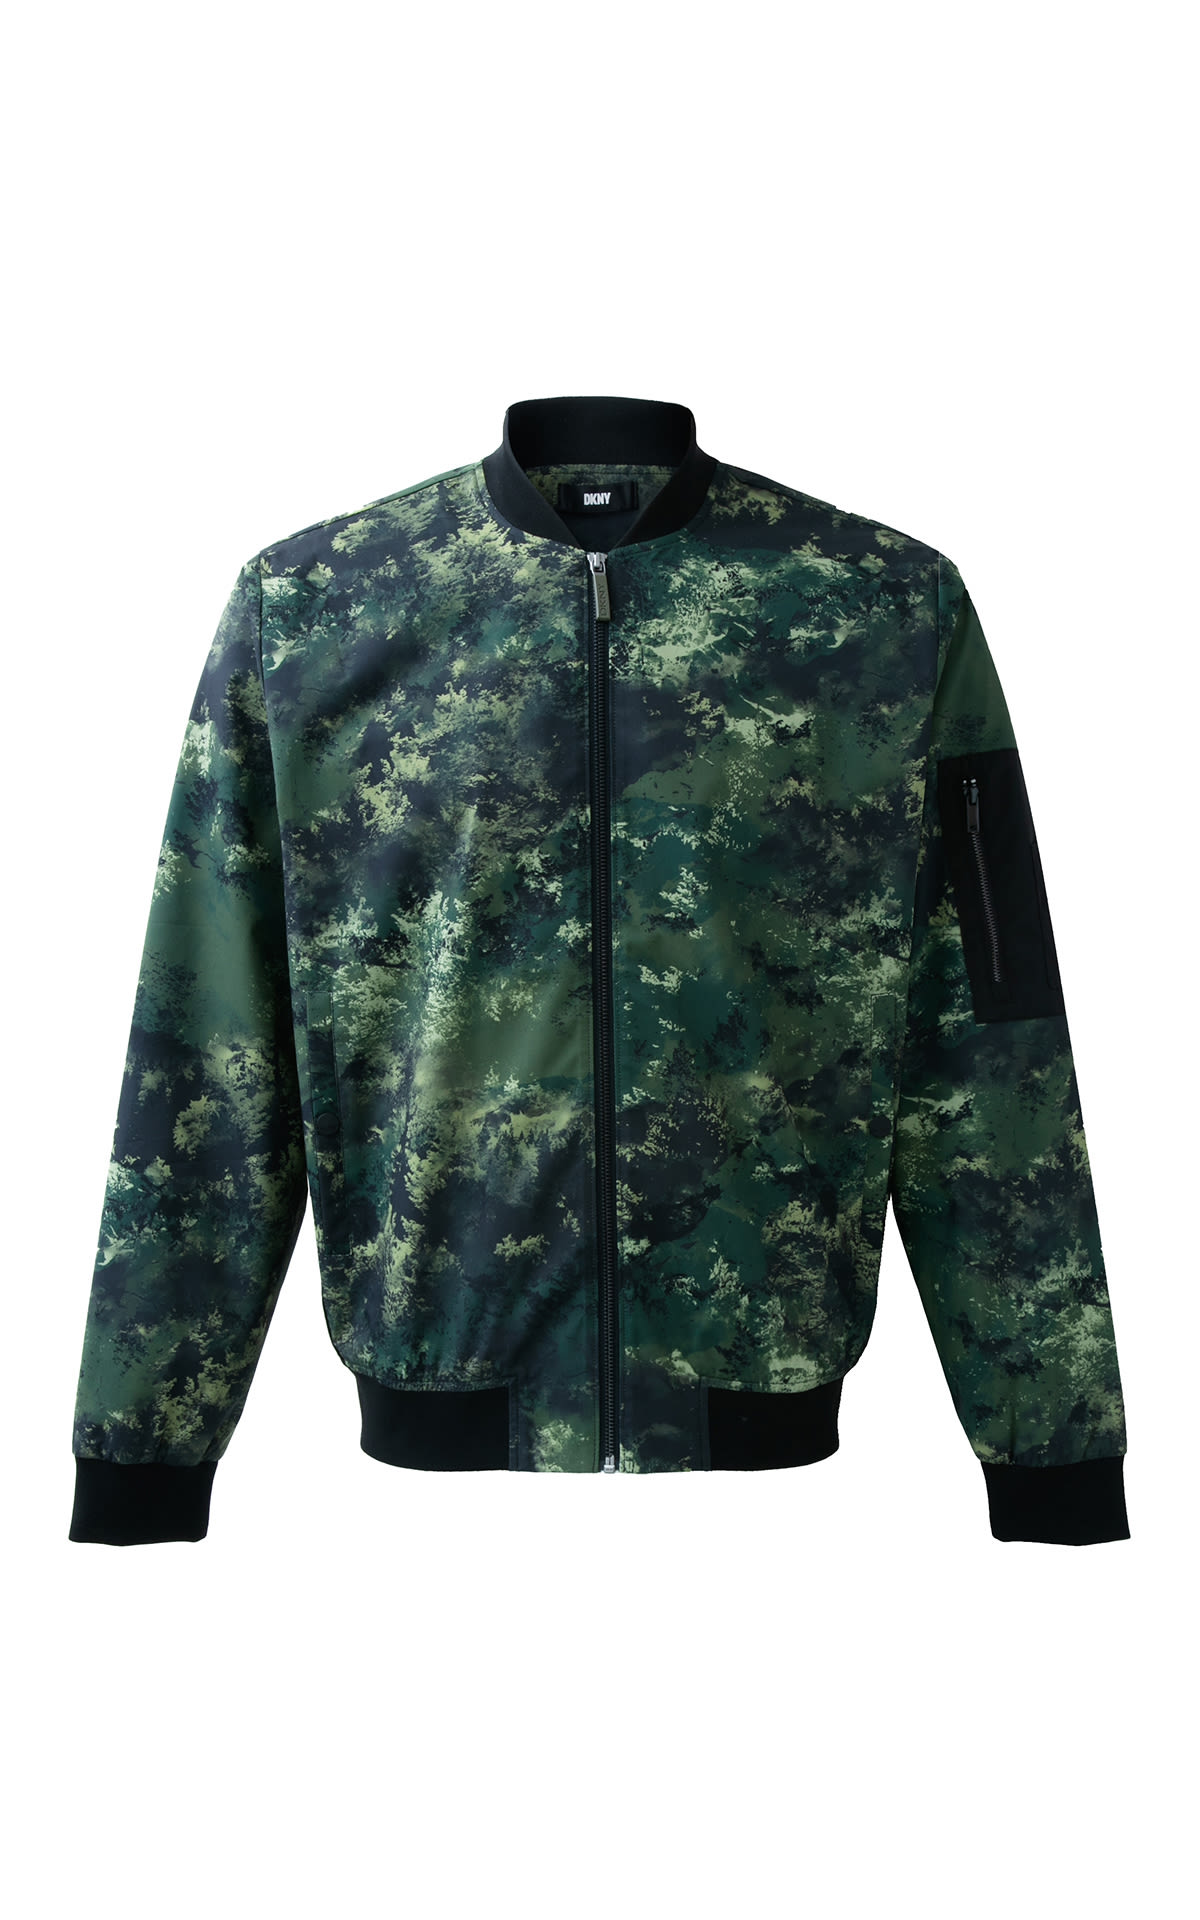 DKNY Leaf camo bomber from Bicester Village